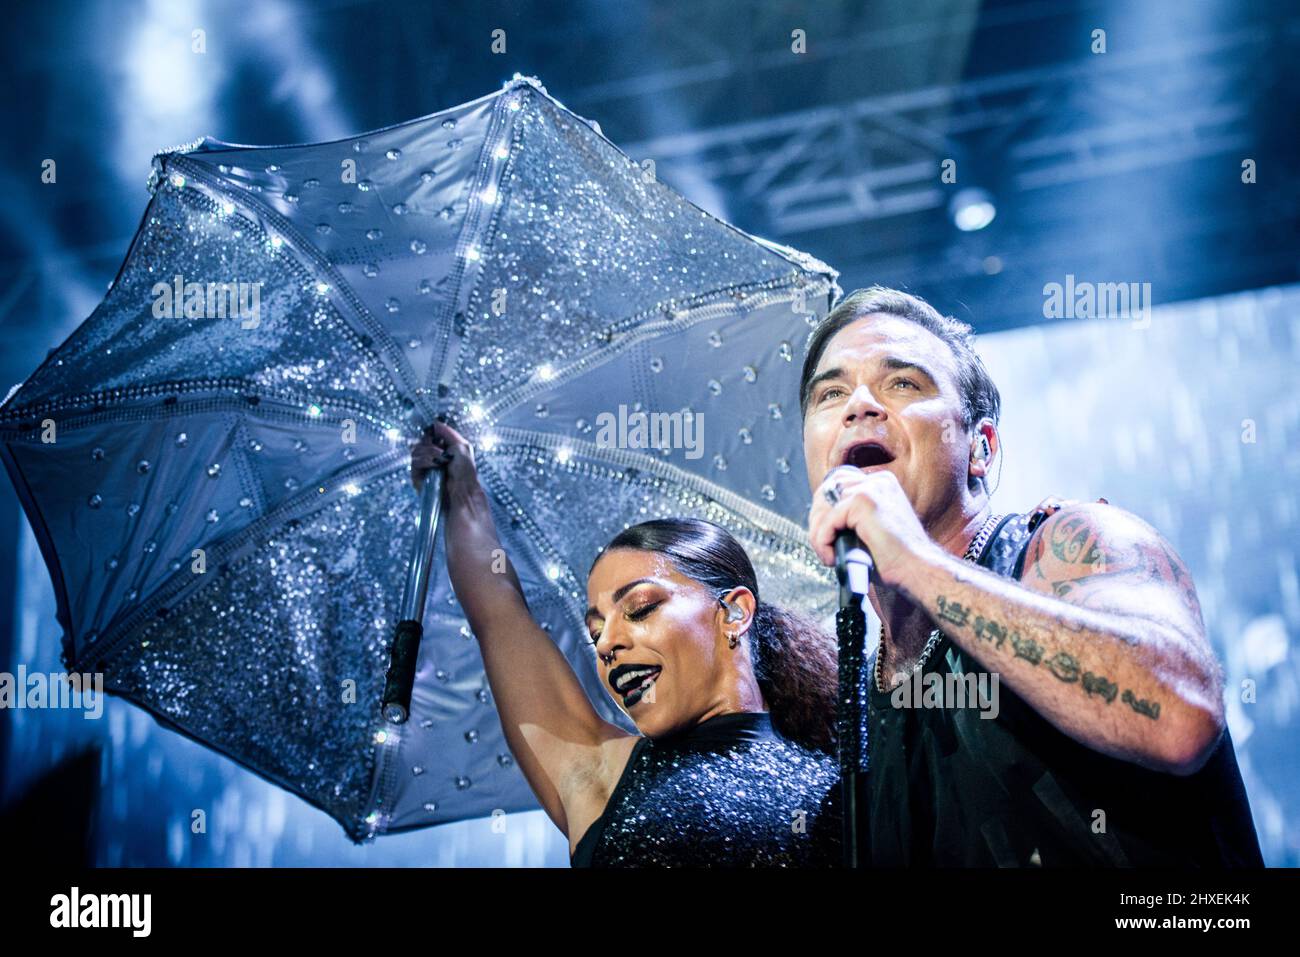 ITALY, BAROLO, COLLISIONI FESTIVAL: The British singer, songwriter and former Take That member, Robbie Williams performing live on stage at the Collisioni festival 2017 for “The Heavy Entertainment Show” tour. Stock Photo